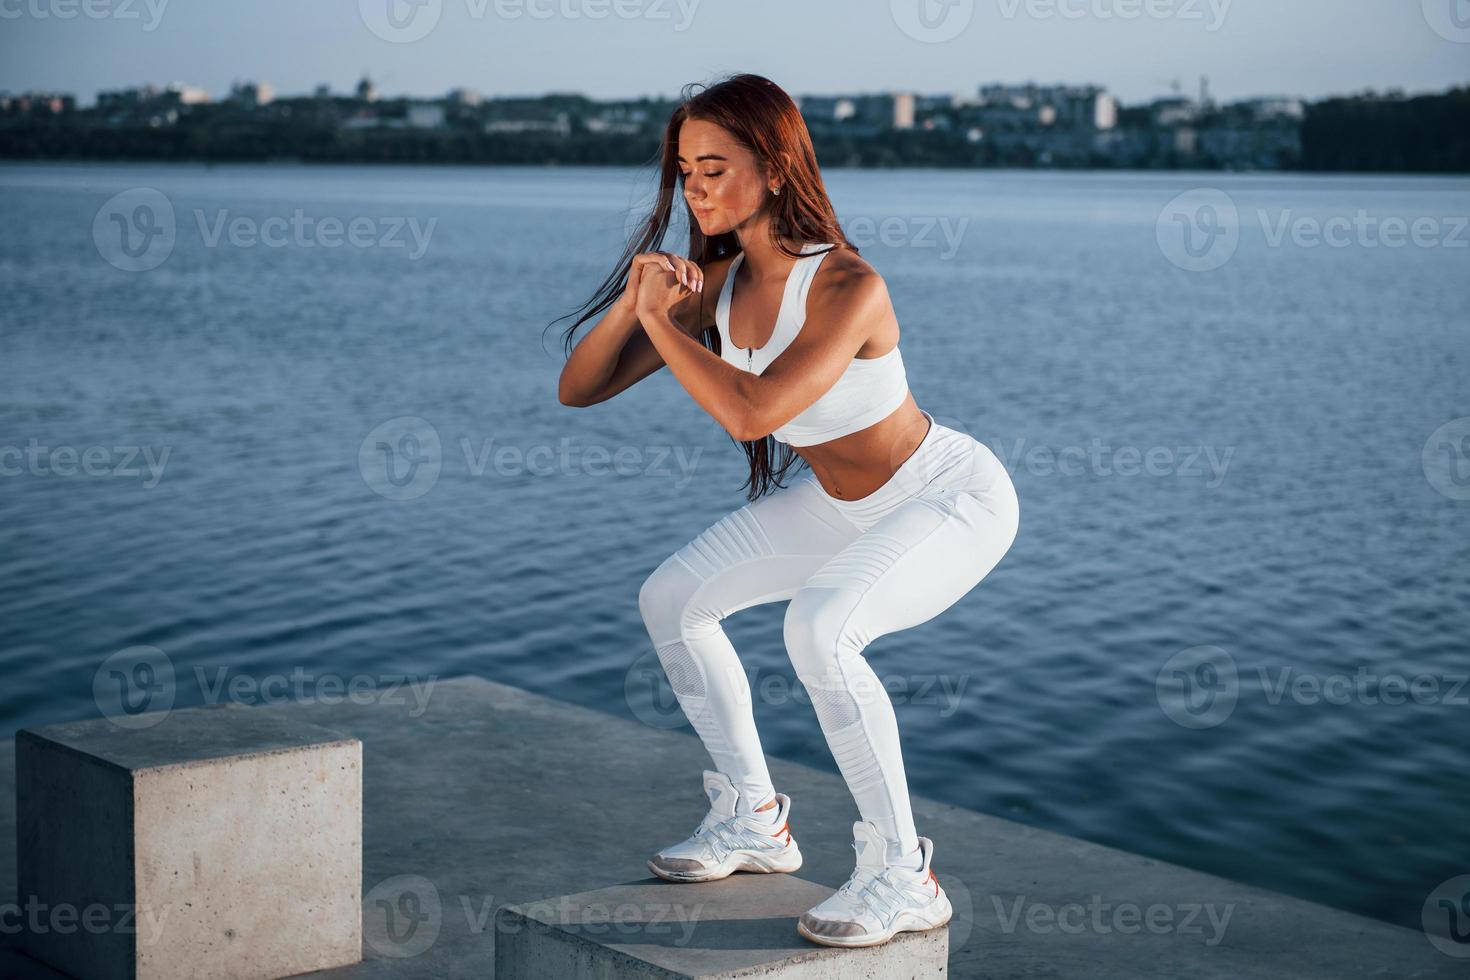 Doing squats on the cement cube. Shot of sportive woman doing fitness exercises near the lake at daytime photo